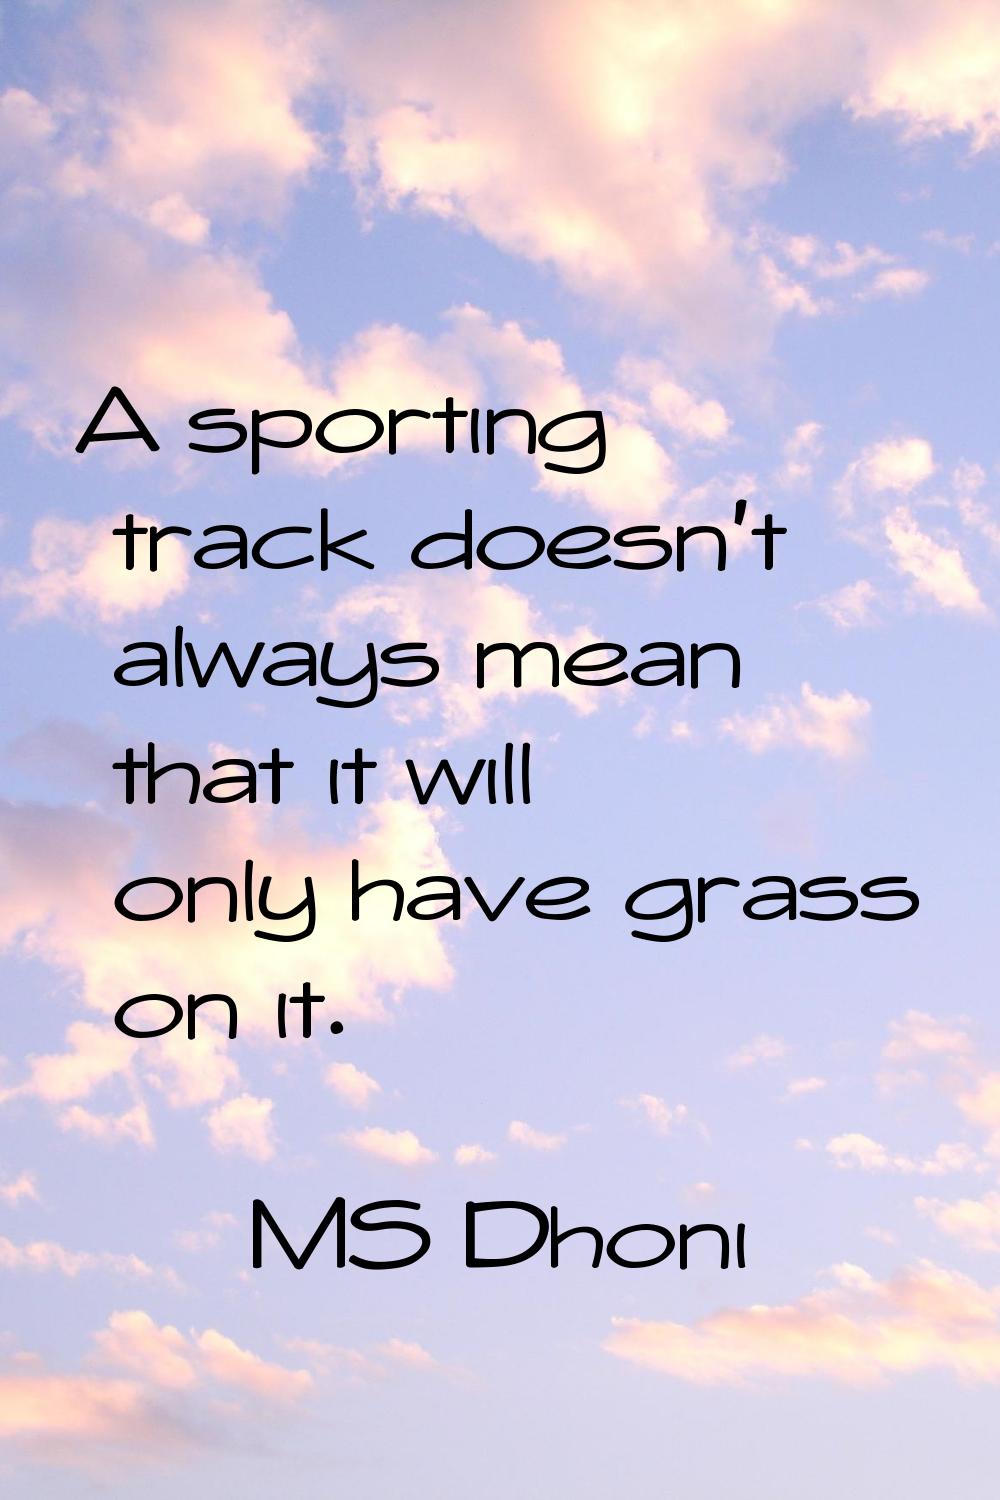 A sporting track doesn't always mean that it will only have grass on it.